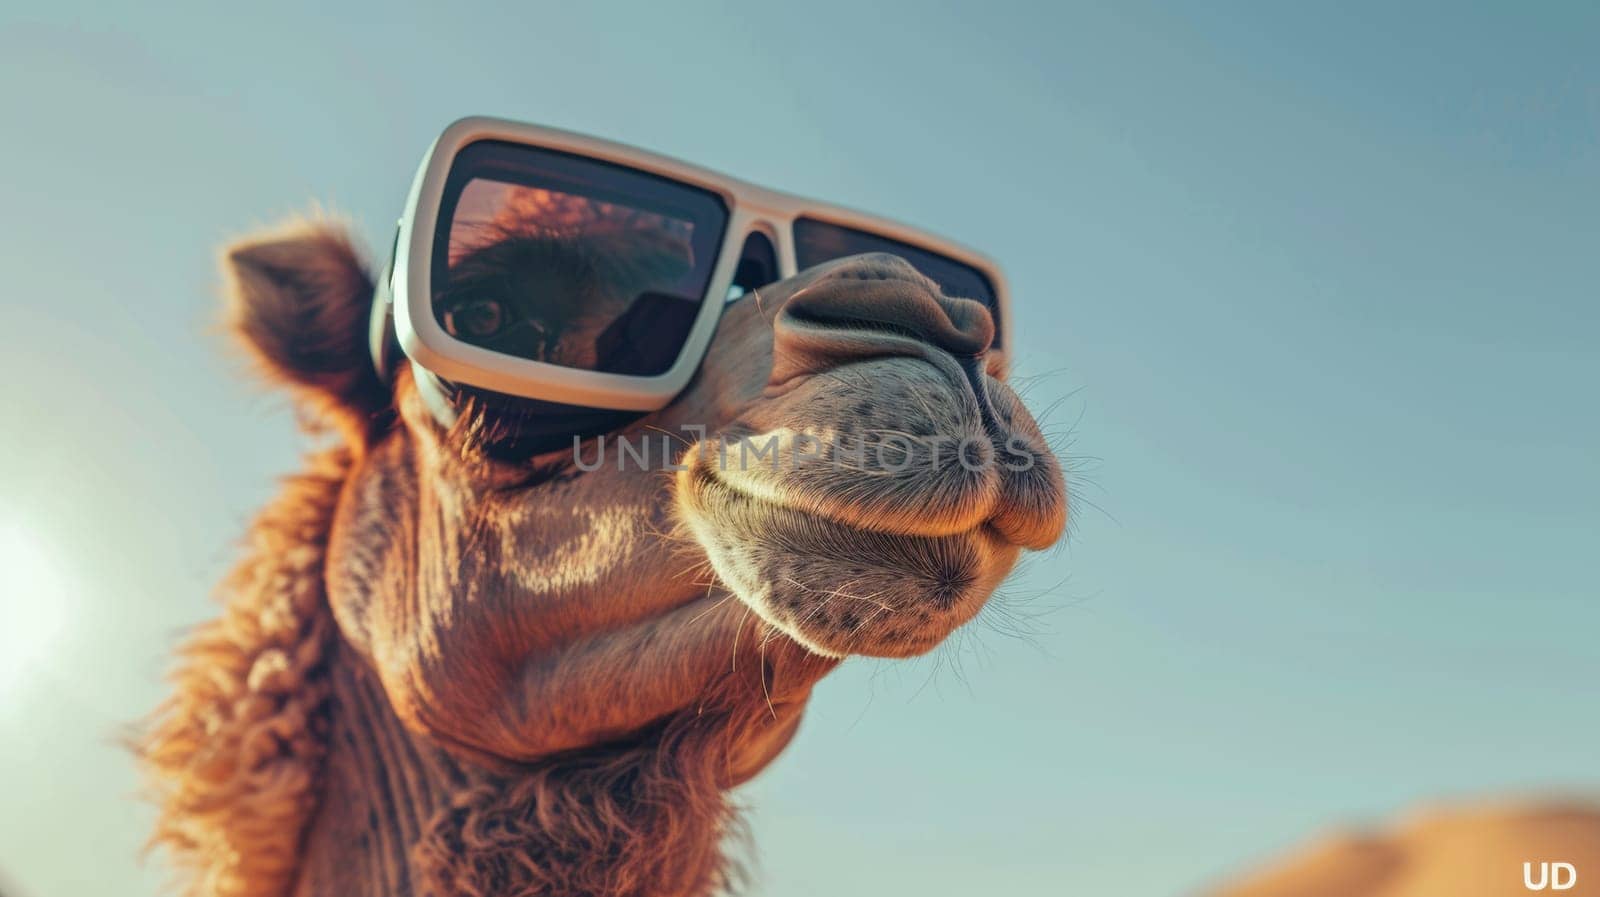 A camel wearing sunglasses with a wide open mouth